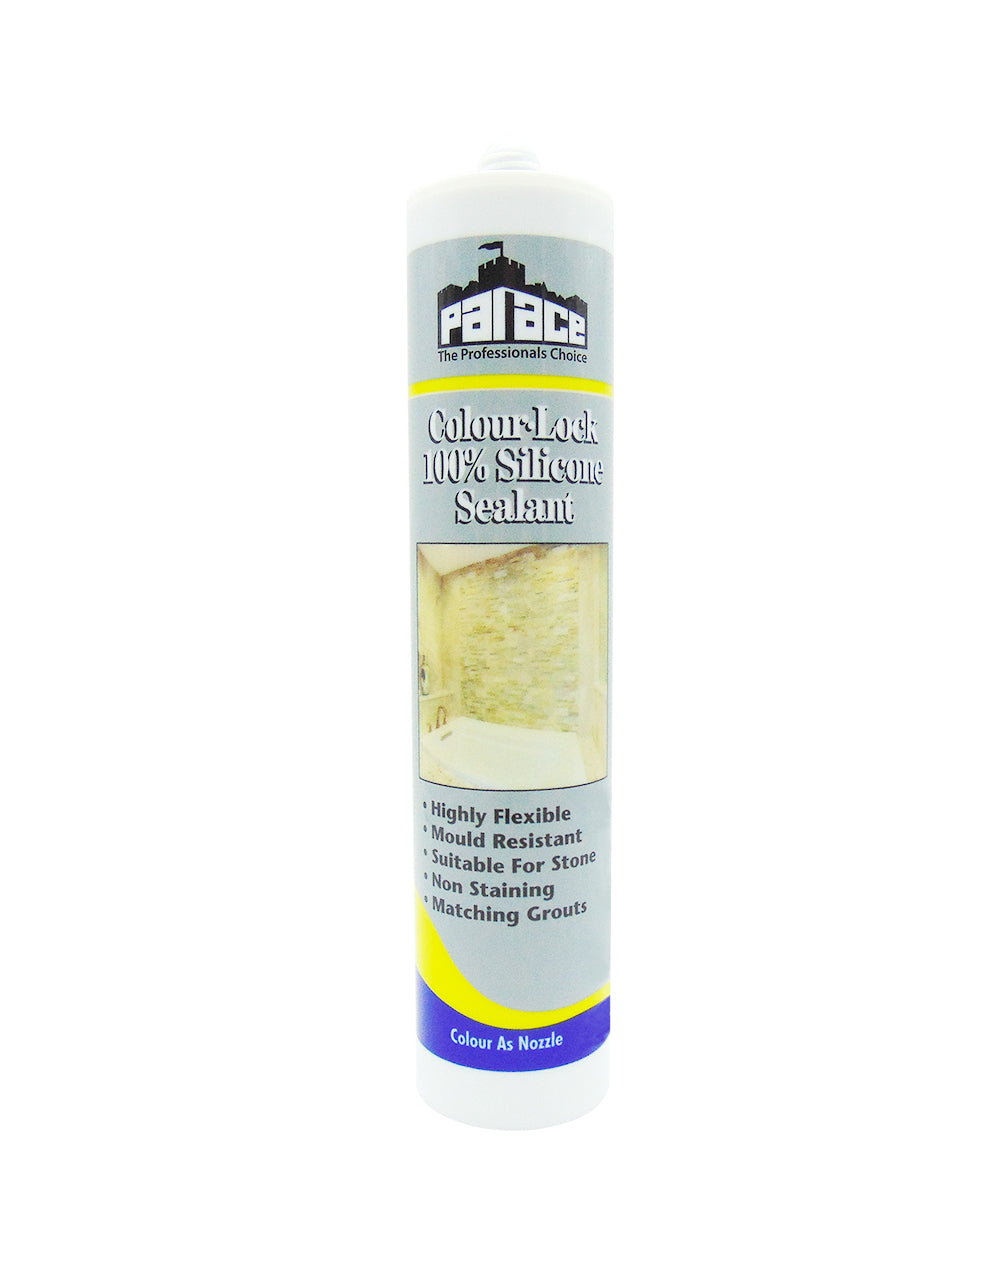 Palace Colour-Lock 100% Silicone Sealant | High Performance One Component Flexible & Waterproof Sanitary Silicone Sealant